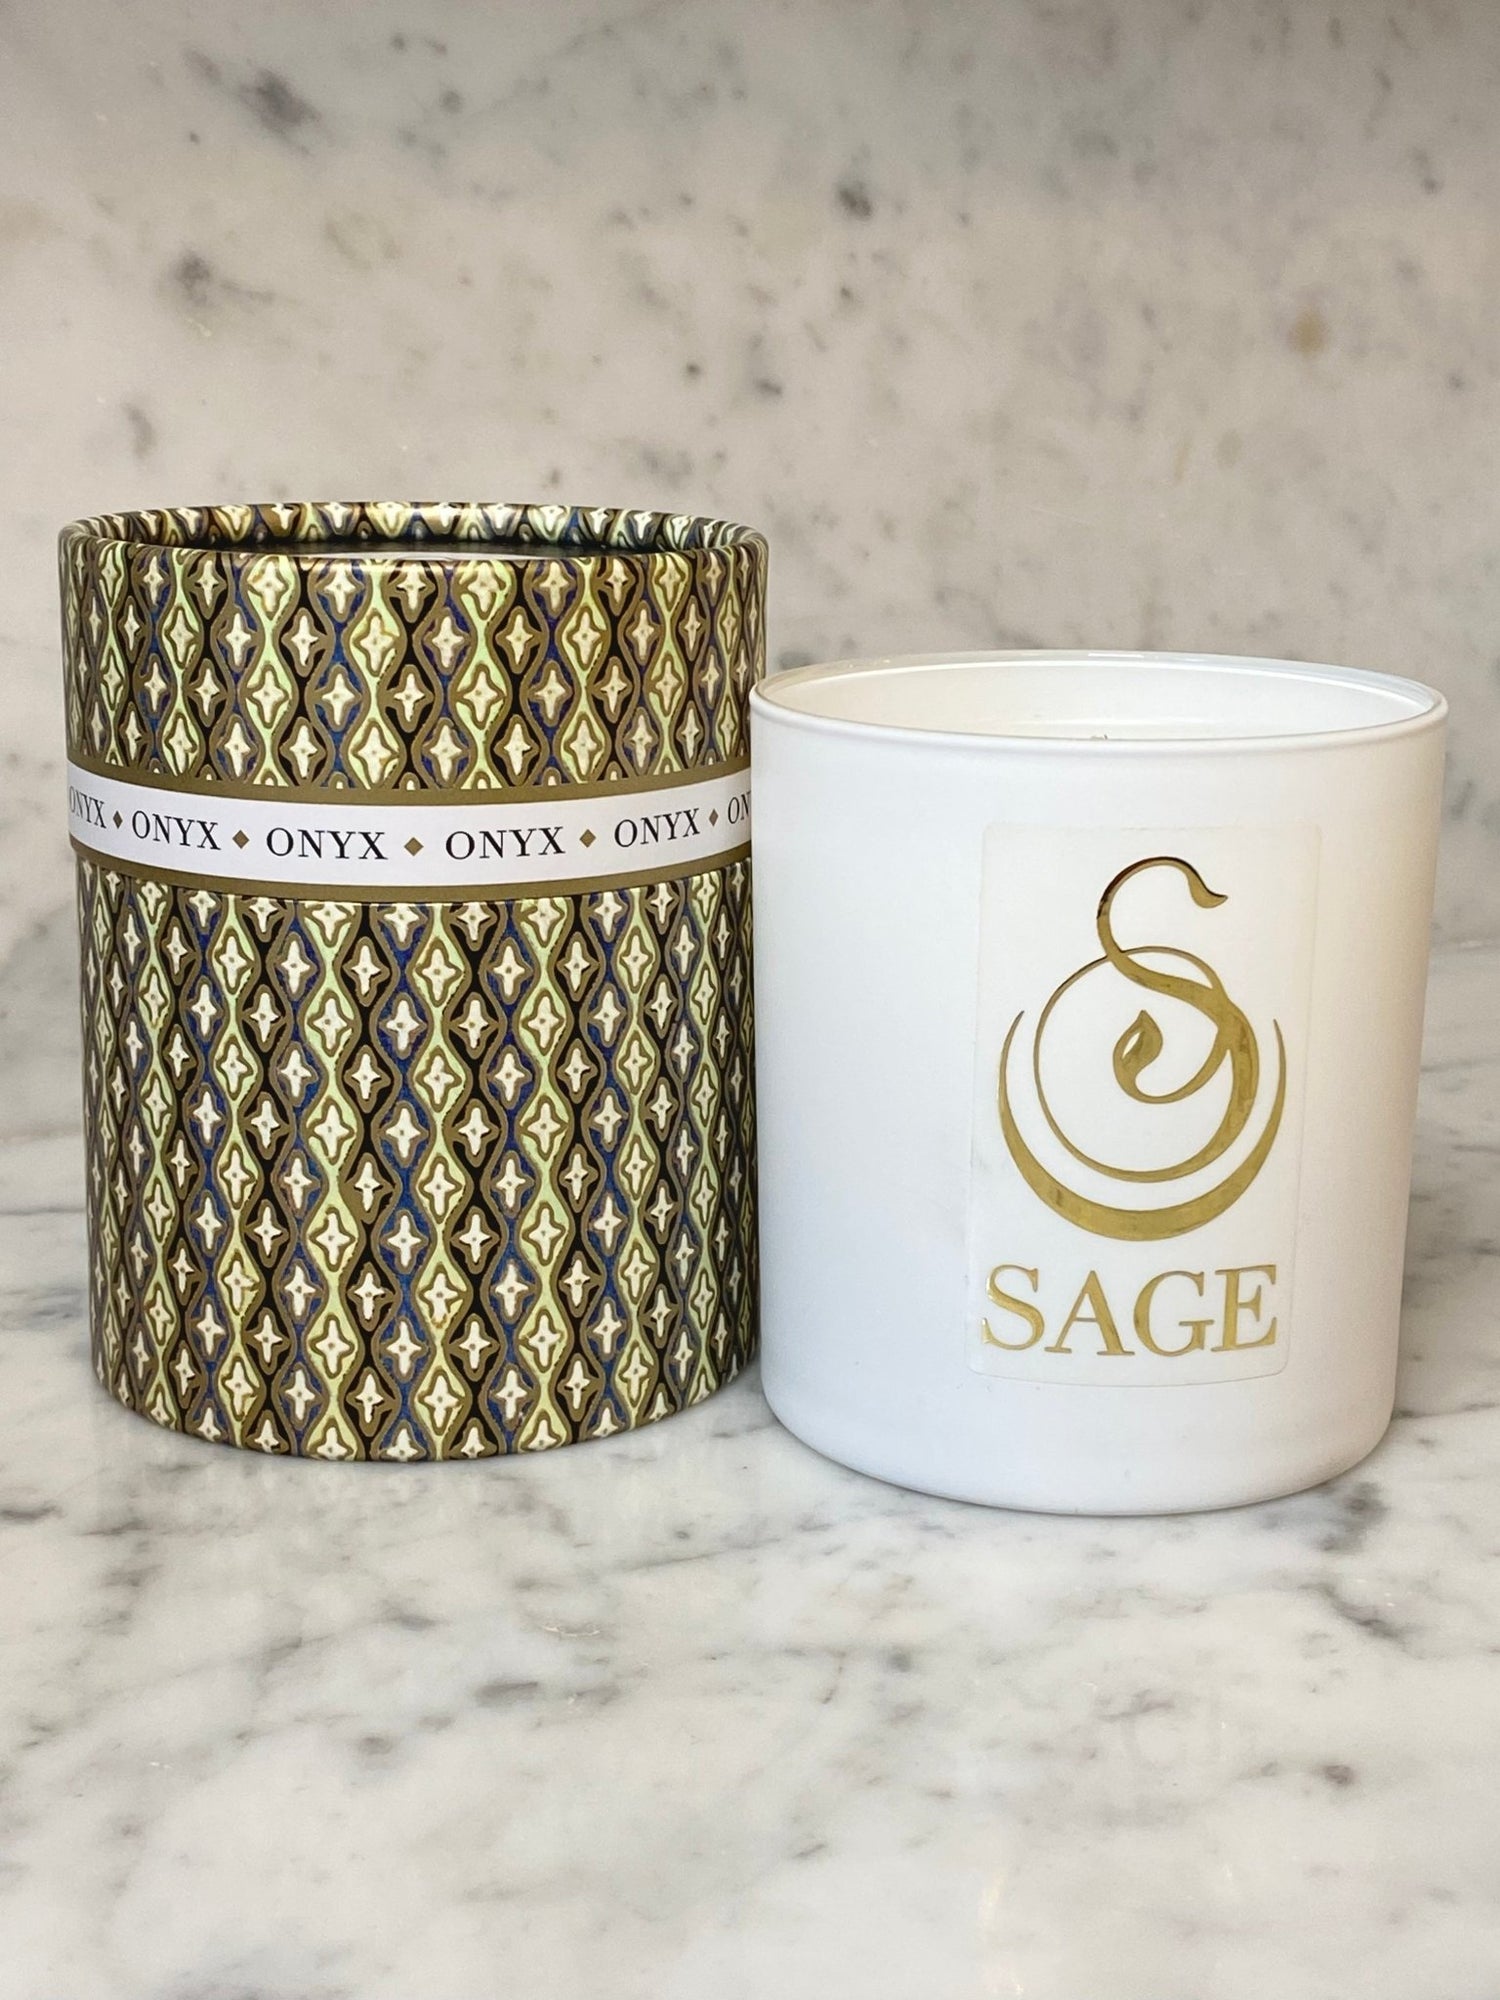 Top Seller Candle Trio Gift Set by Sage - The Sage Lifestyle